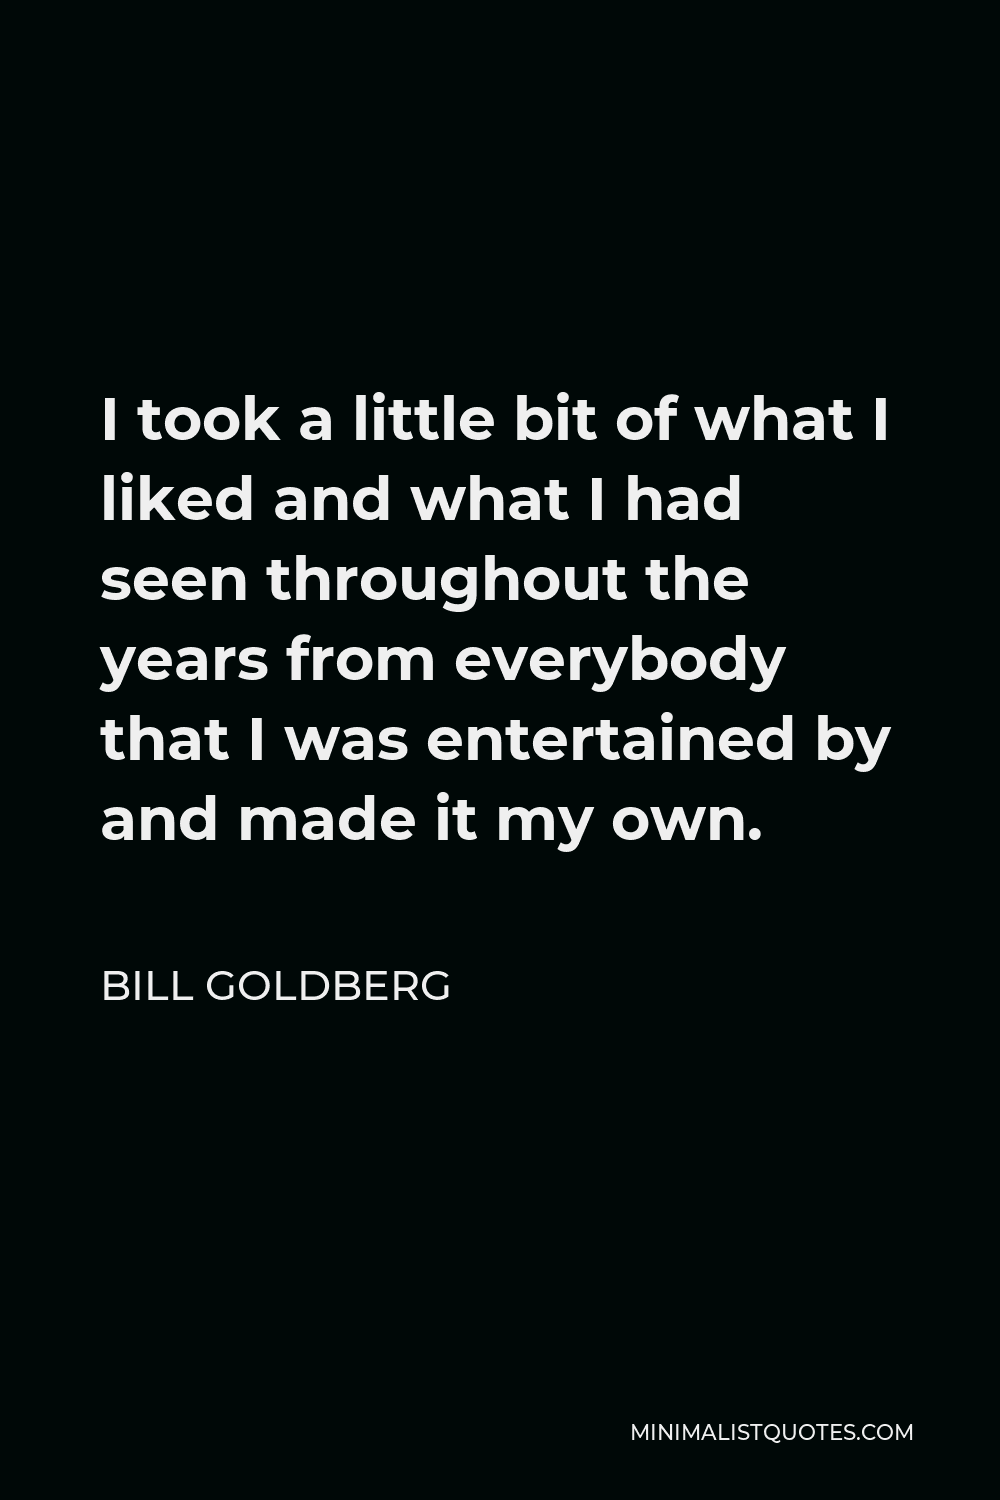 Bill Goldberg Quote - I took a little bit of what I liked and what I had seen throughout the years from everybody that I was entertained by and made it my own.